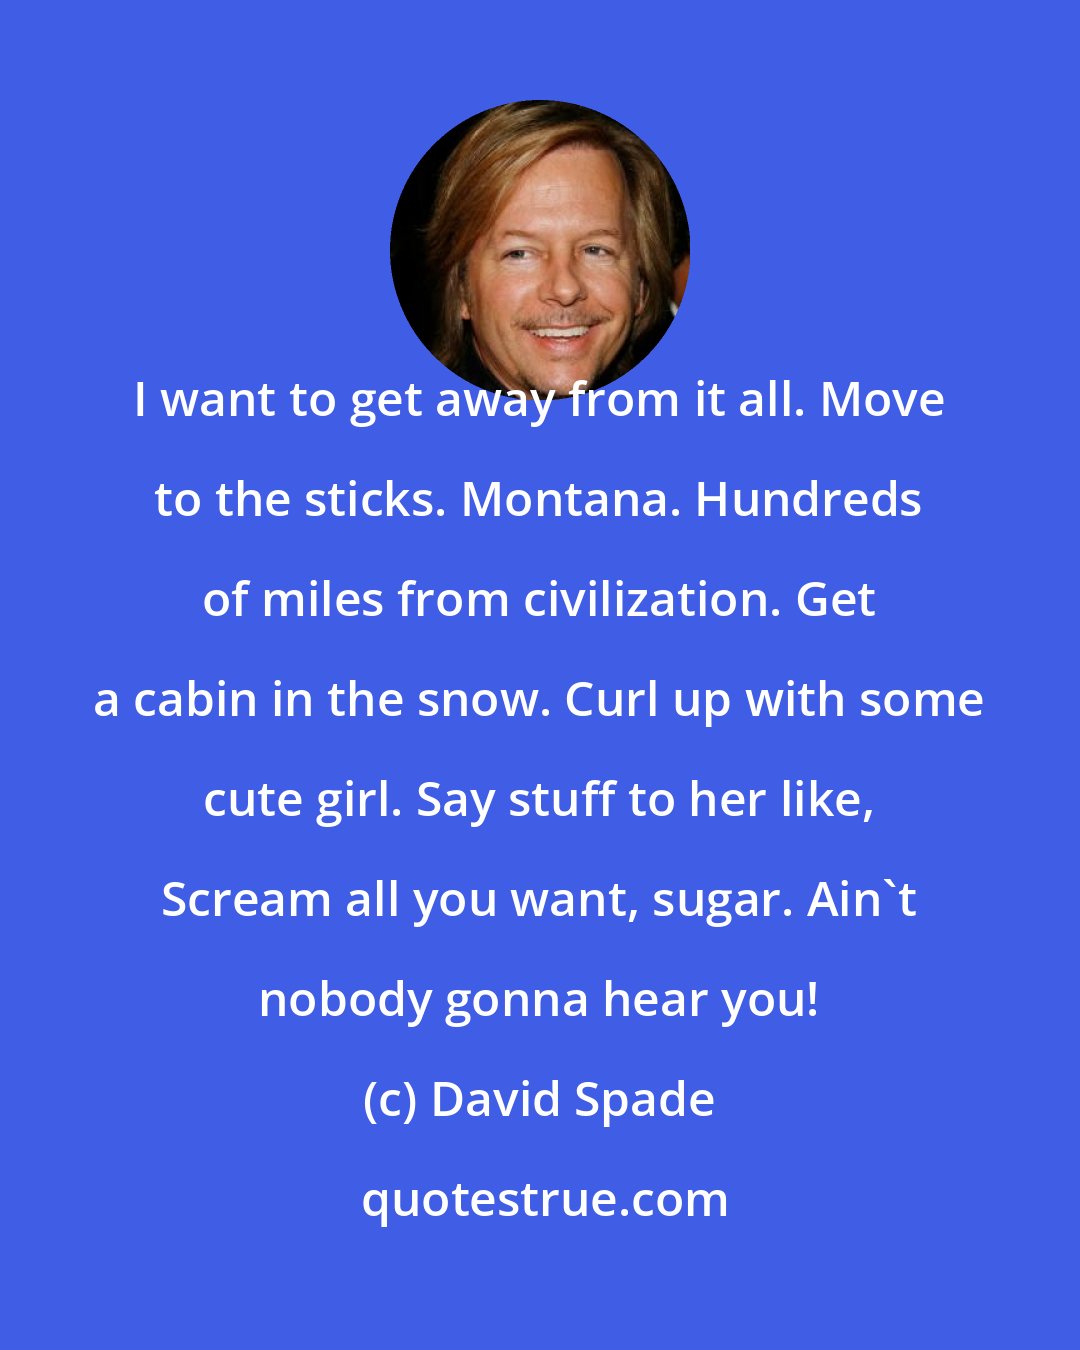 David Spade: I want to get away from it all. Move to the sticks. Montana. Hundreds of miles from civilization. Get a cabin in the snow. Curl up with some cute girl. Say stuff to her like, Scream all you want, sugar. Ain't nobody gonna hear you!